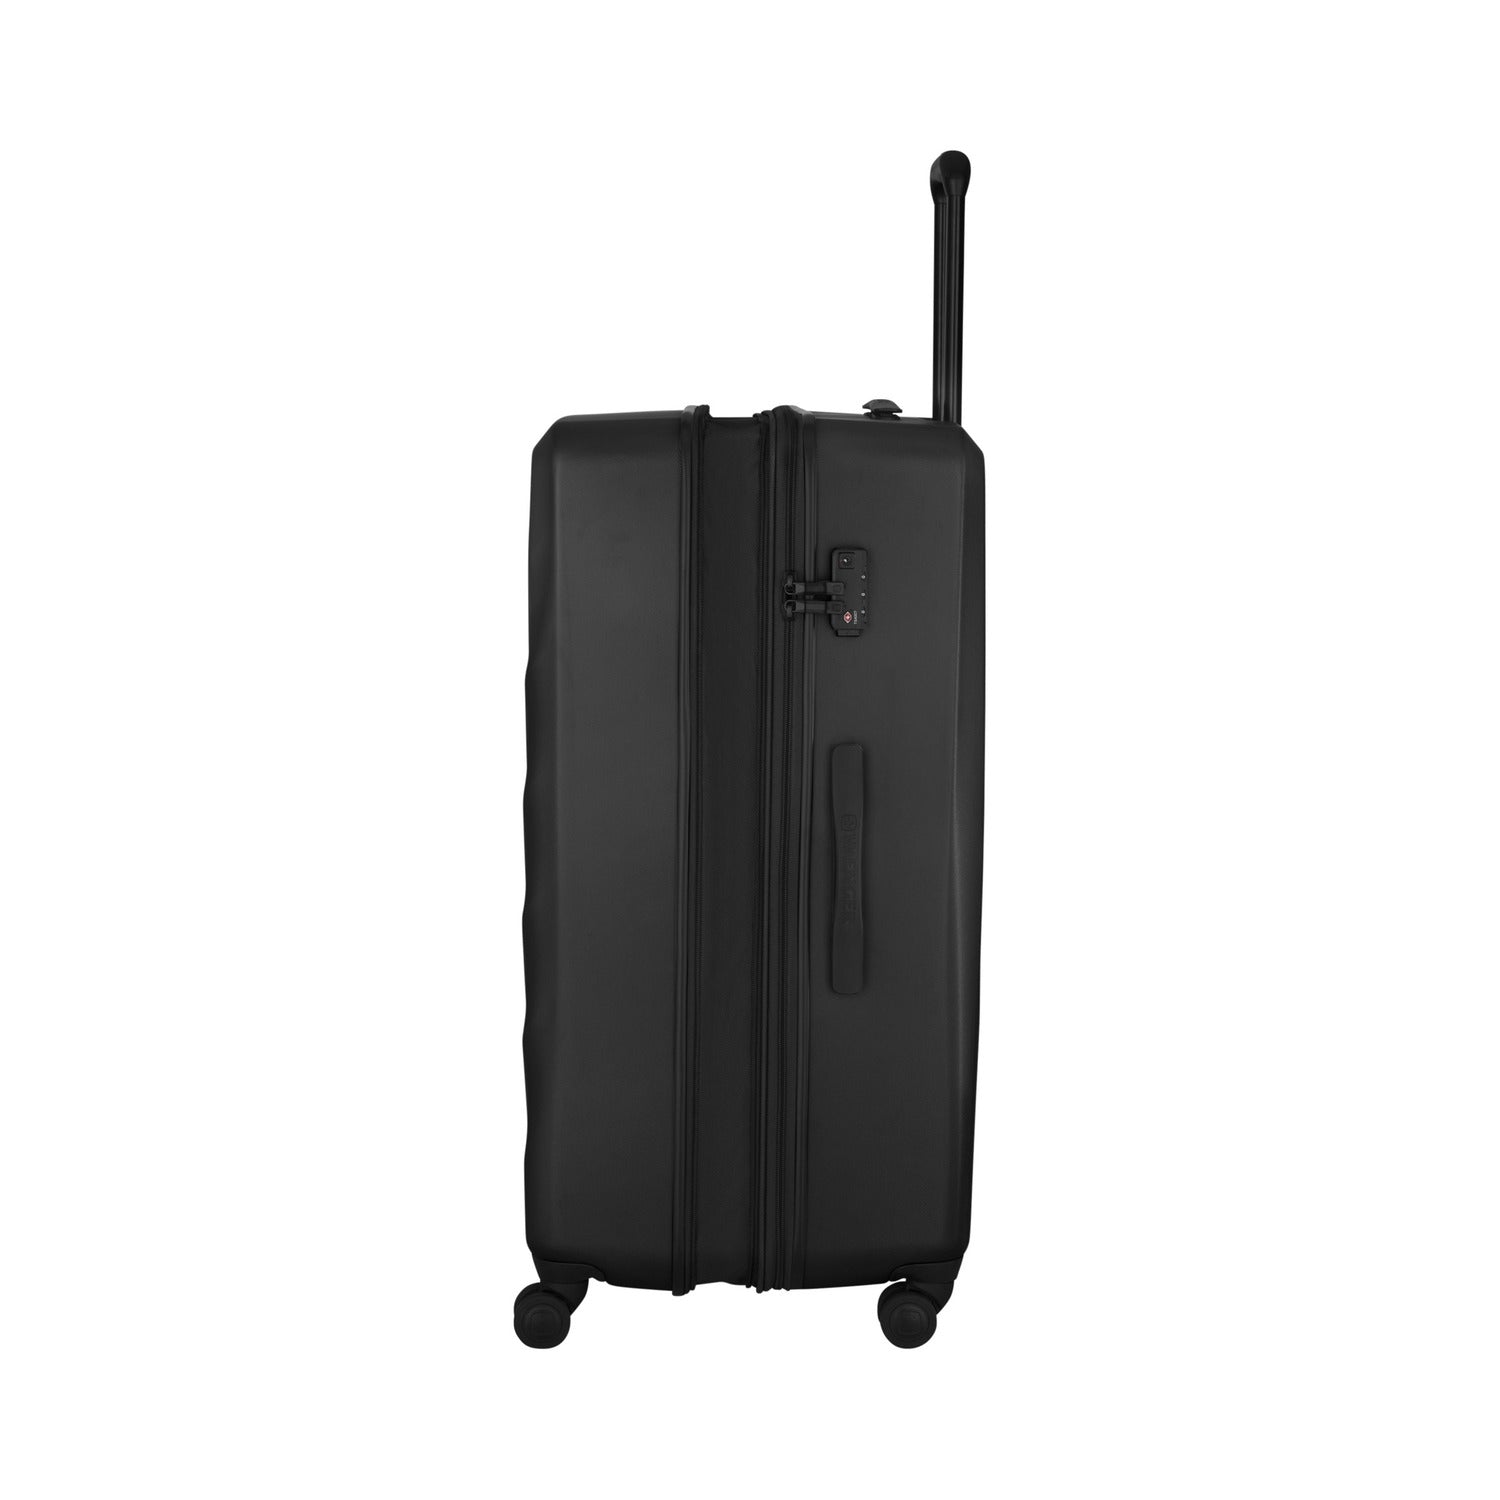 Wenger Motion 81cm Hardside Expandable Check-In Luggage Trolley Black - 612709